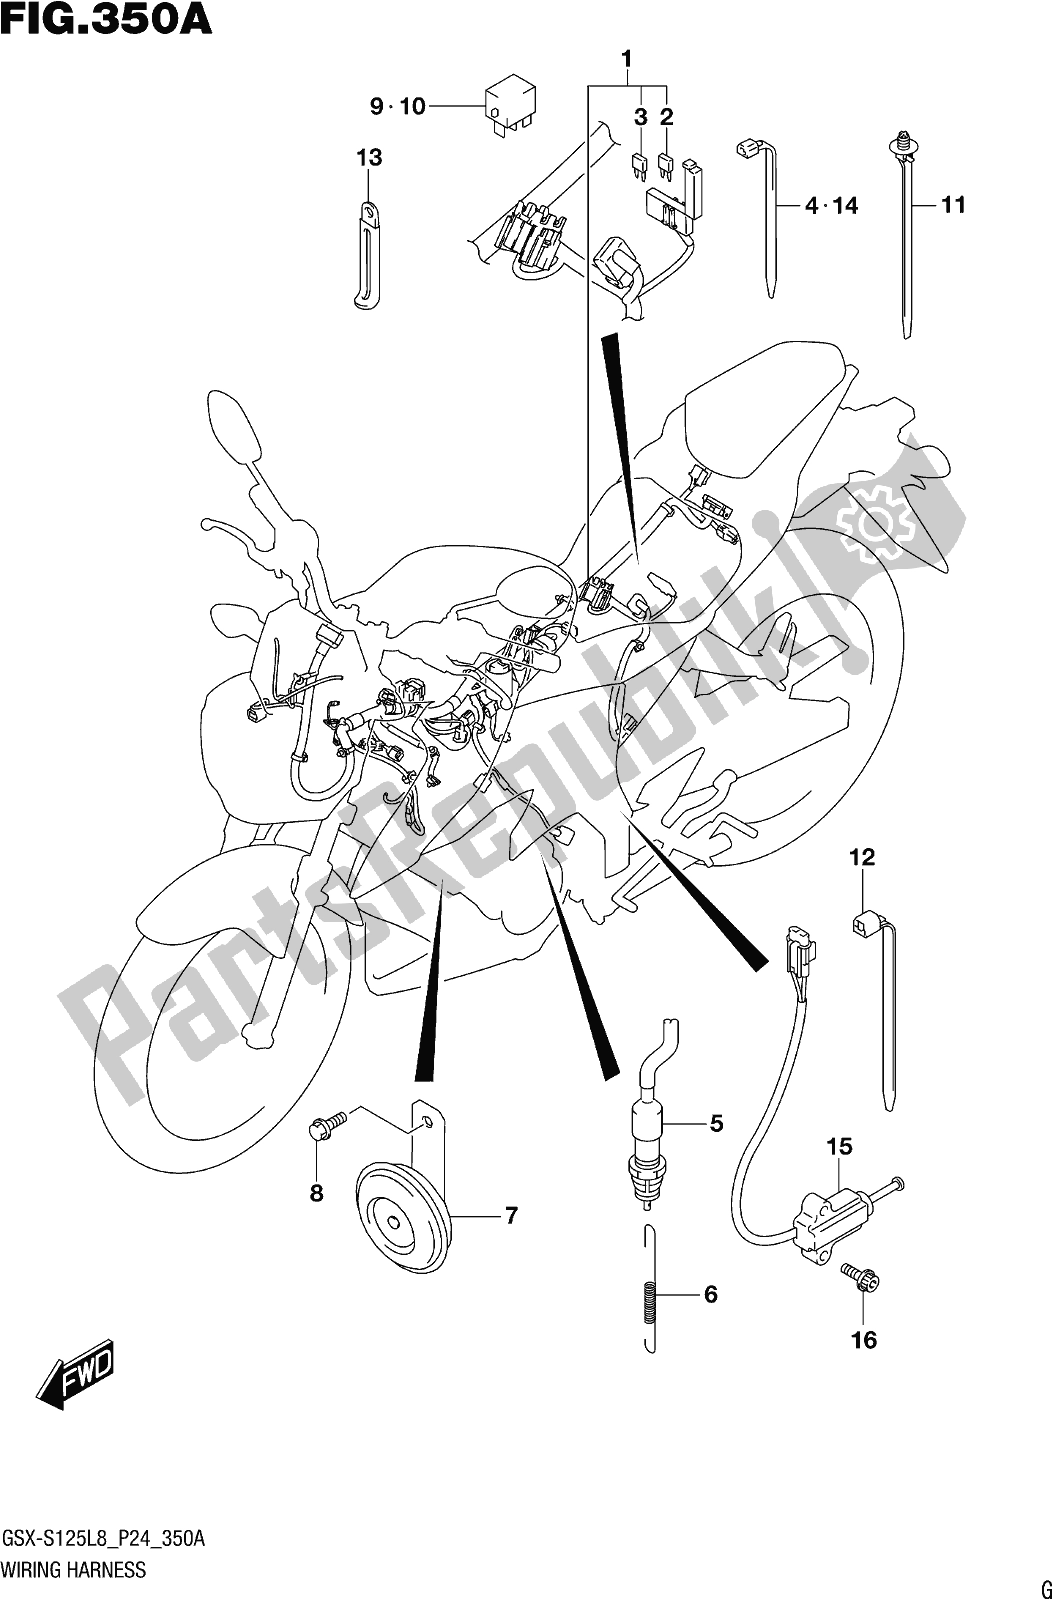 All parts for the Fig. 350a Wiring Harness of the Suzuki Gsx-s 125 ML 2018